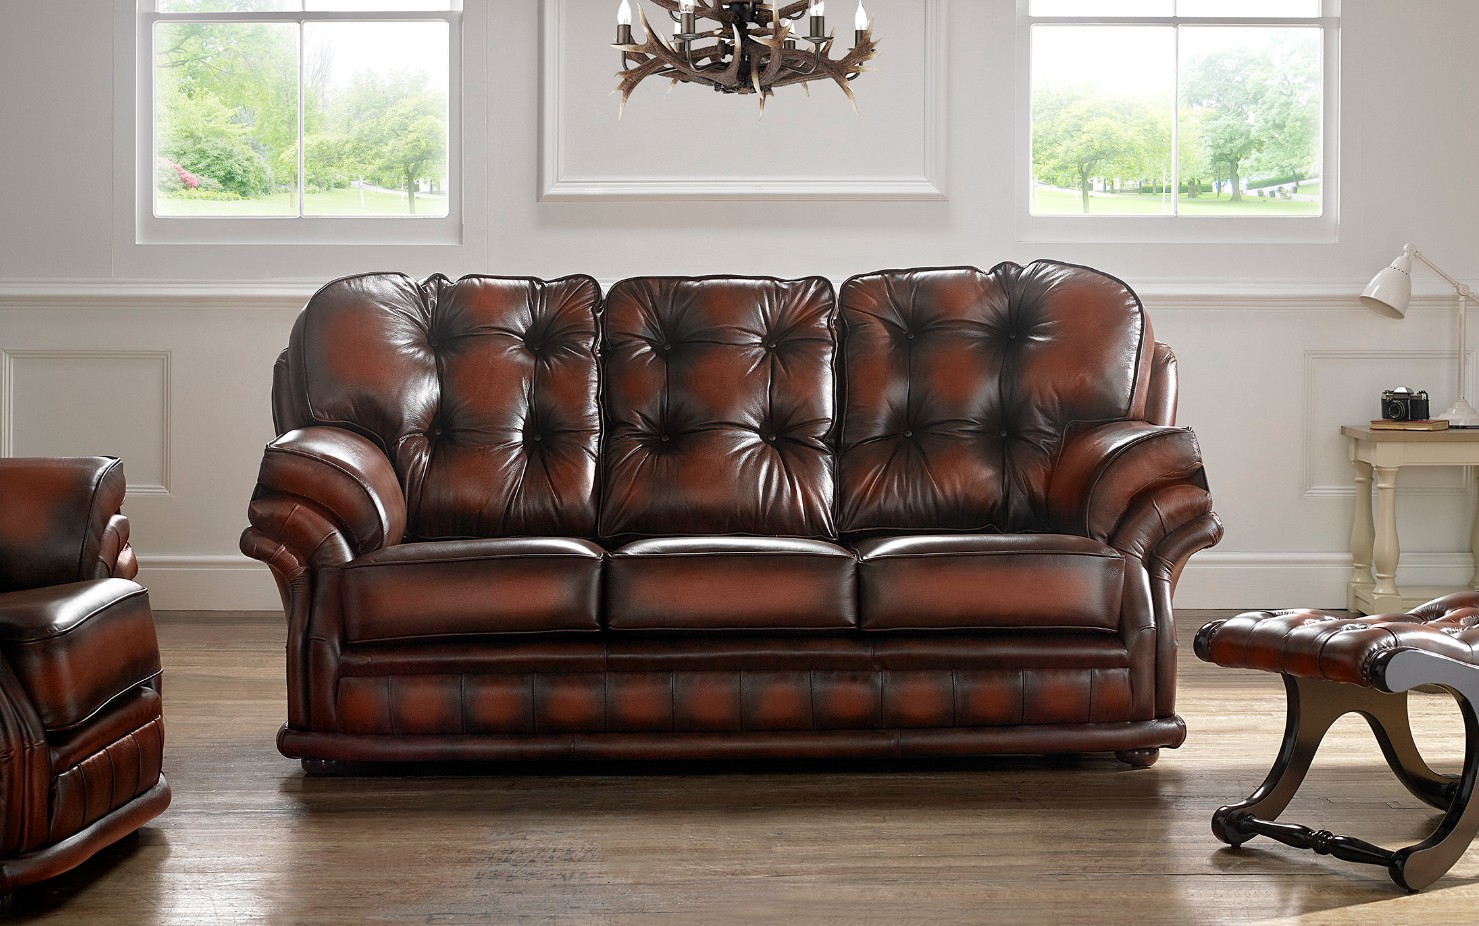 Product photograph of Chesterfield 3 Seater Antique Rust Leather Sofa Bespoke In Knightsbr Idge Style from Chesterfield Sofas